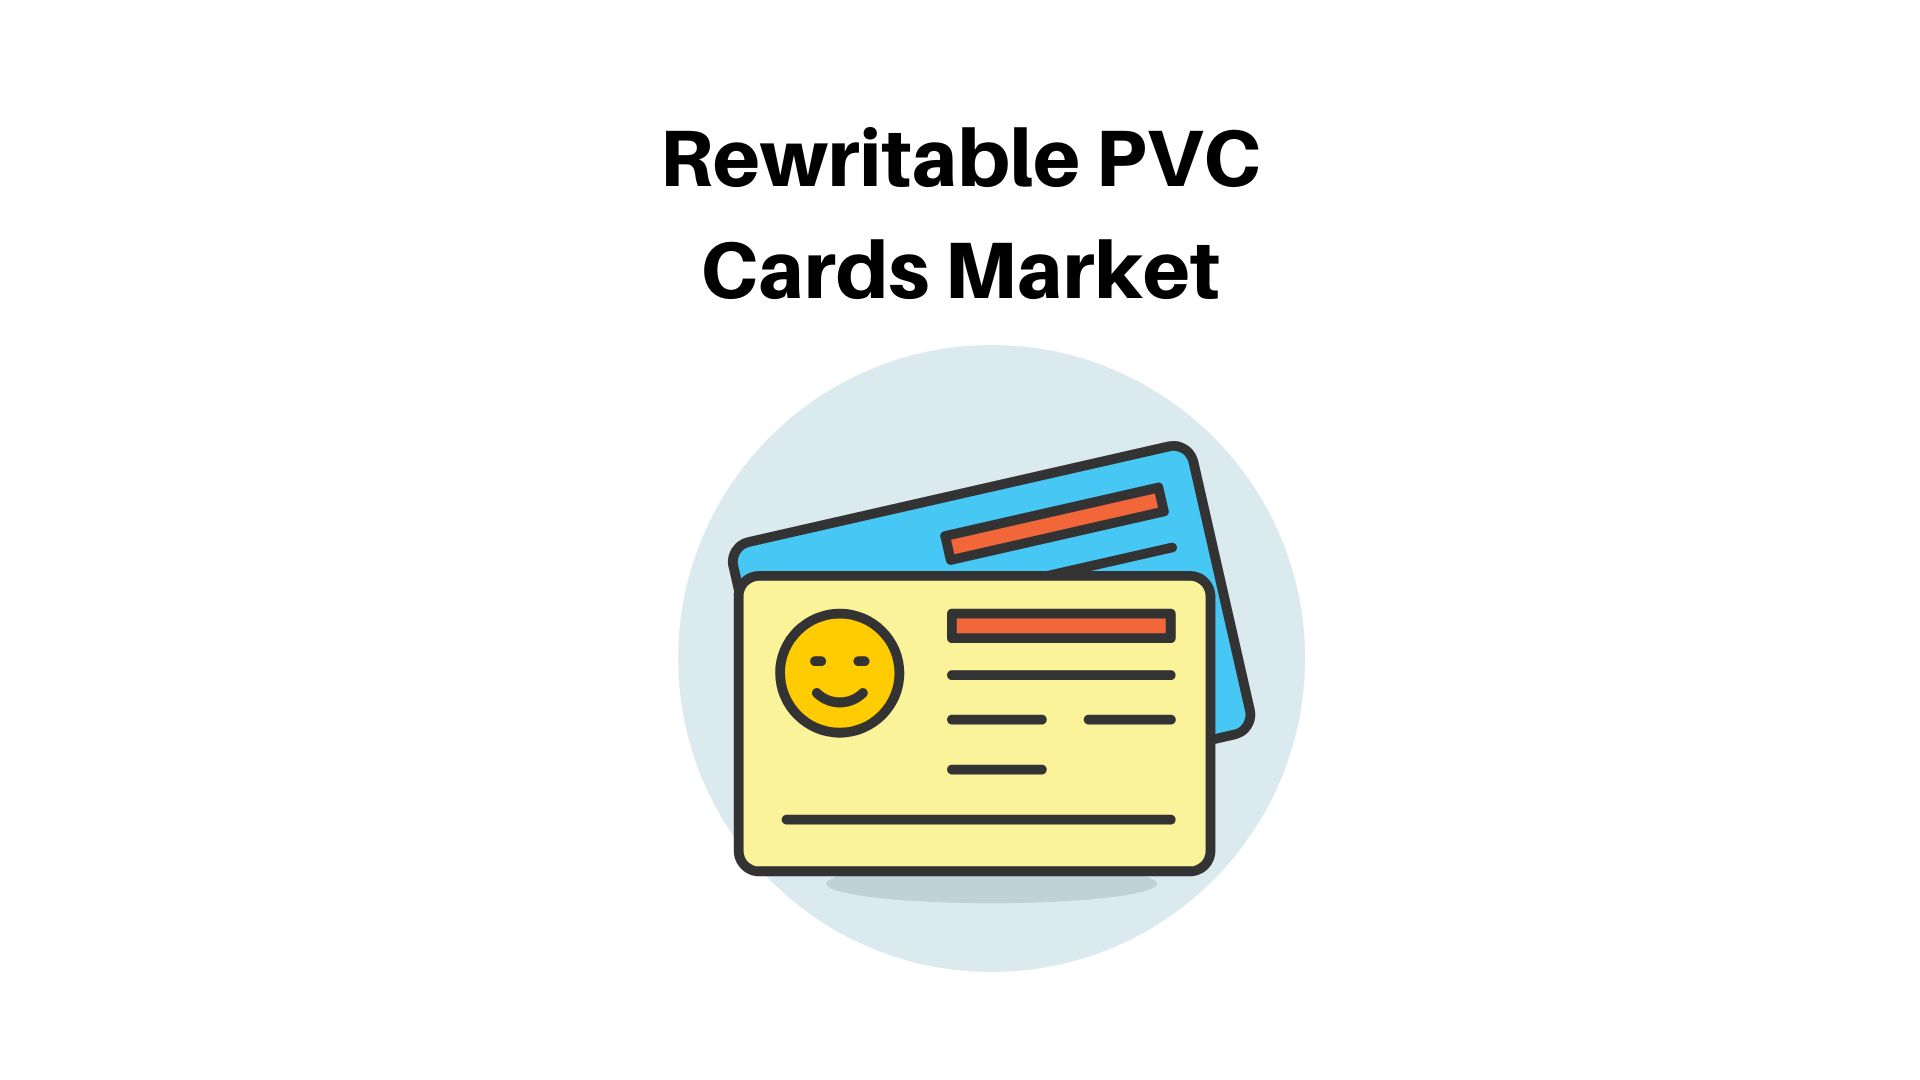 Rewritable PVC Cards Market is poised to grow at a CAGR of 4.02% by 2032